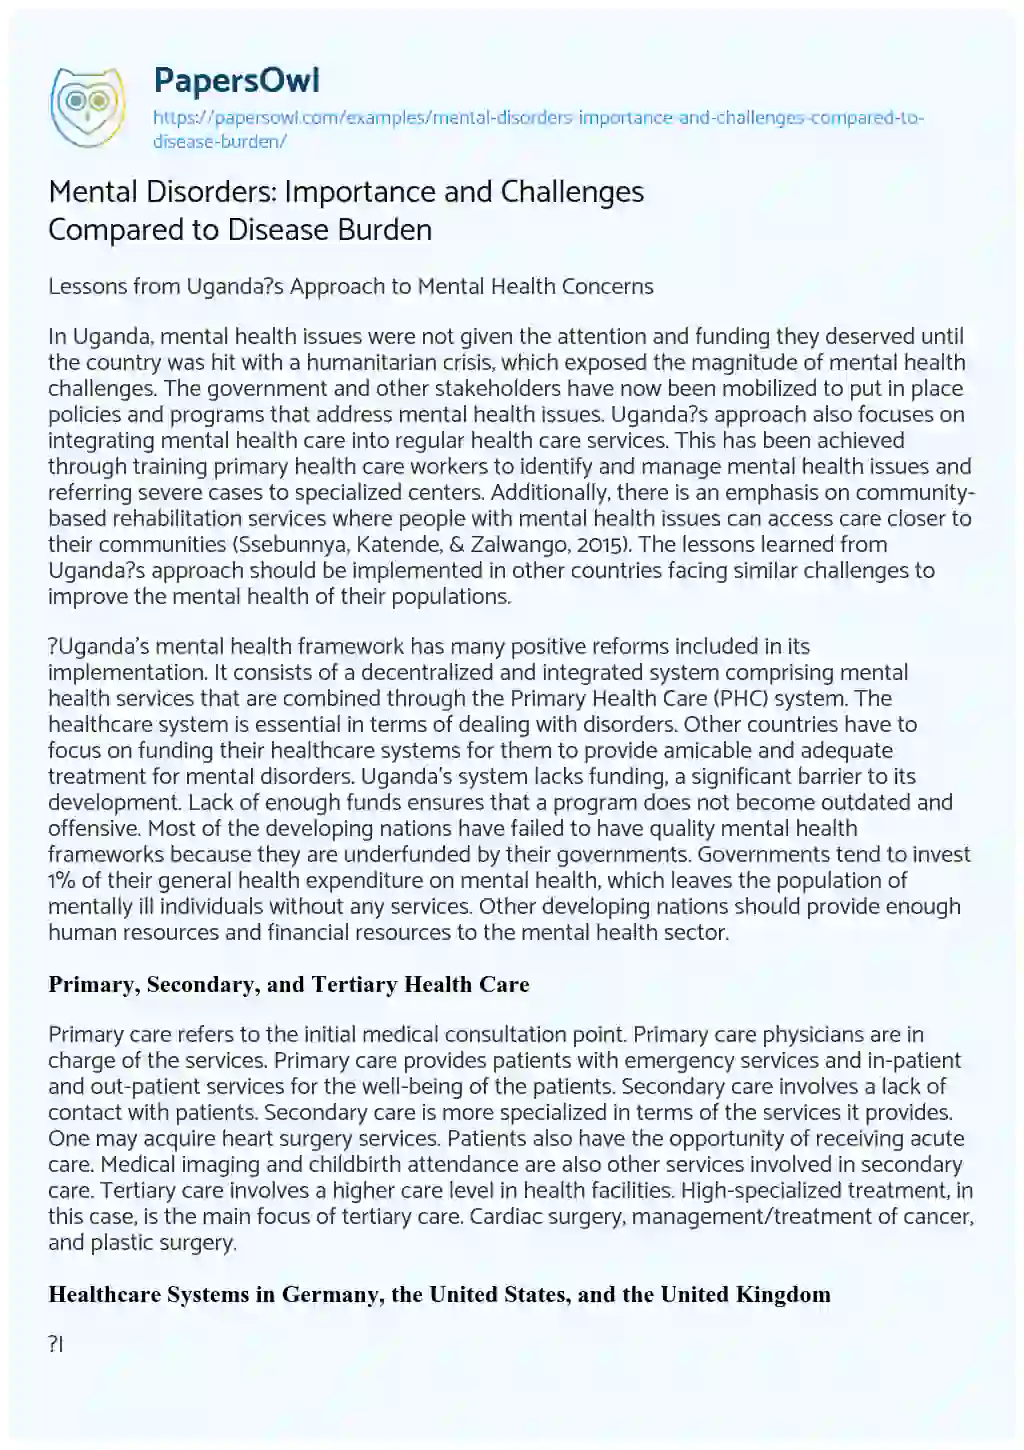 Mental Disorders: Importance and Challenges Compared to Disease Burden essay